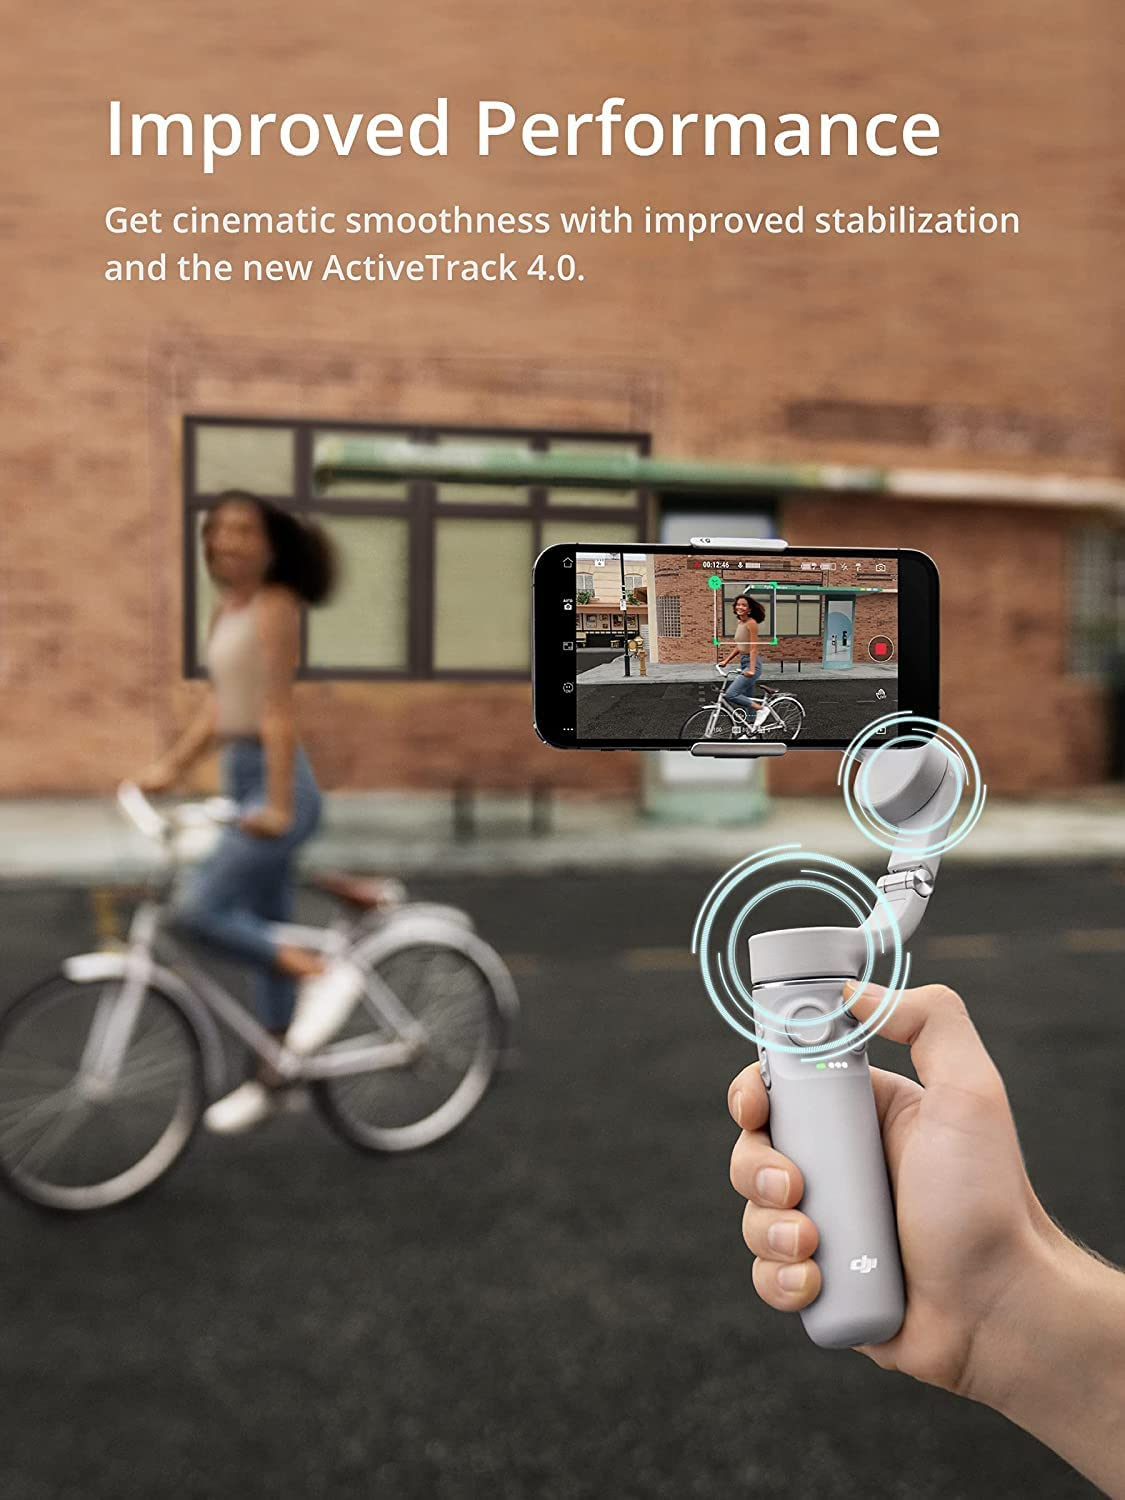 DJI OM 5 Smartphone Gimbal Stabilizer, 3 Axis Phone Gimbal, Built In Extension Rod